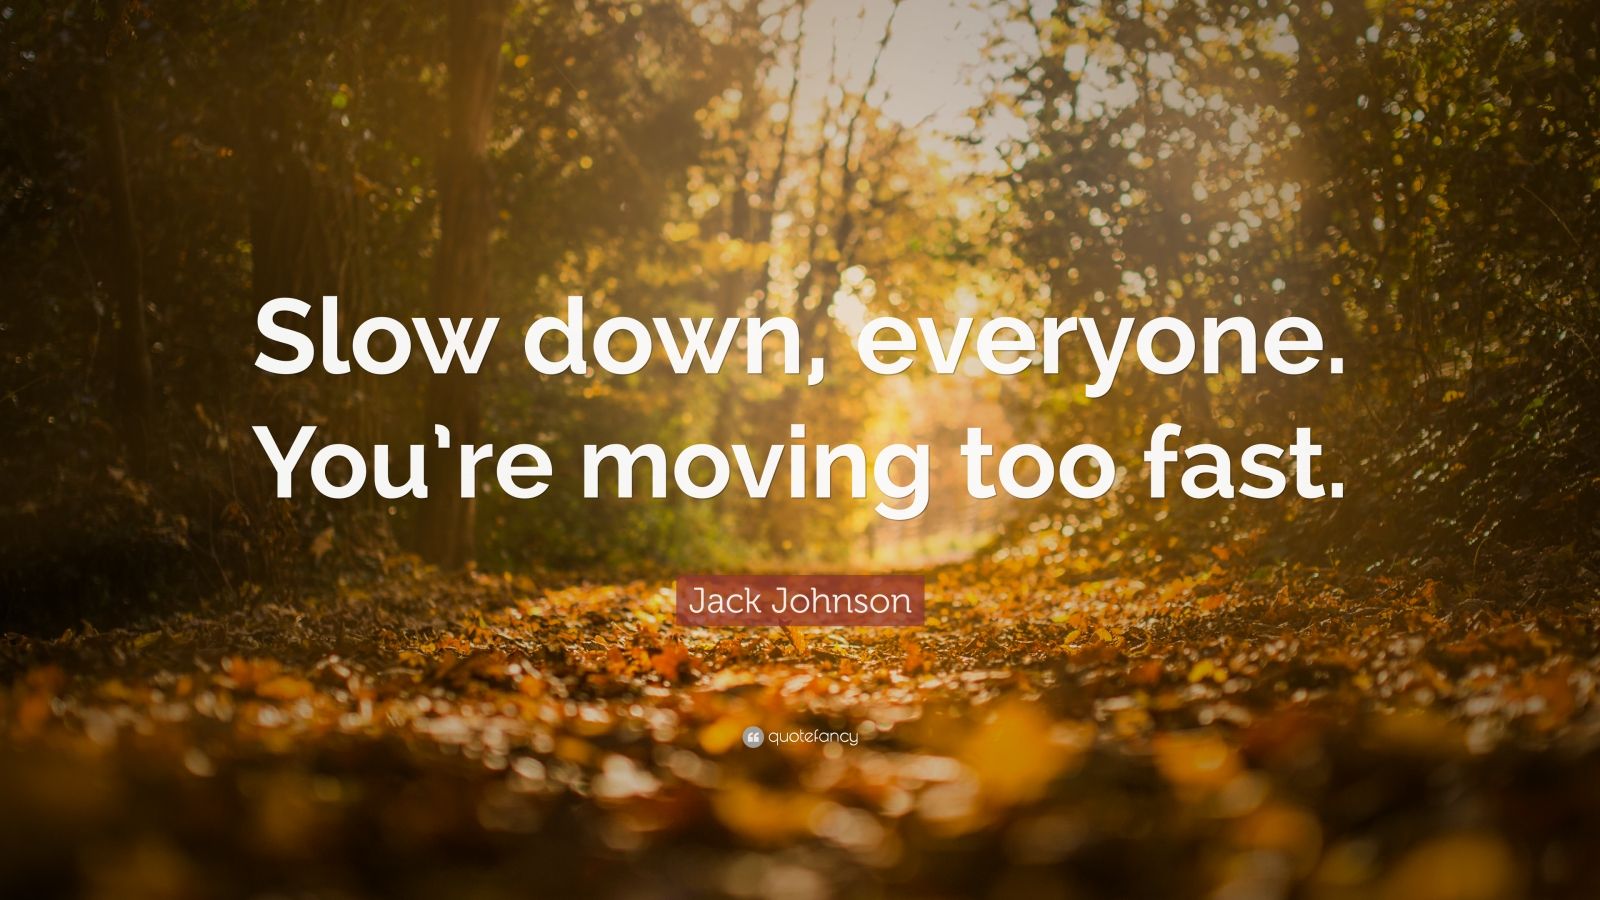 Jack Johnson Quote “Slow down, everyone. You’re moving too fast.” (9